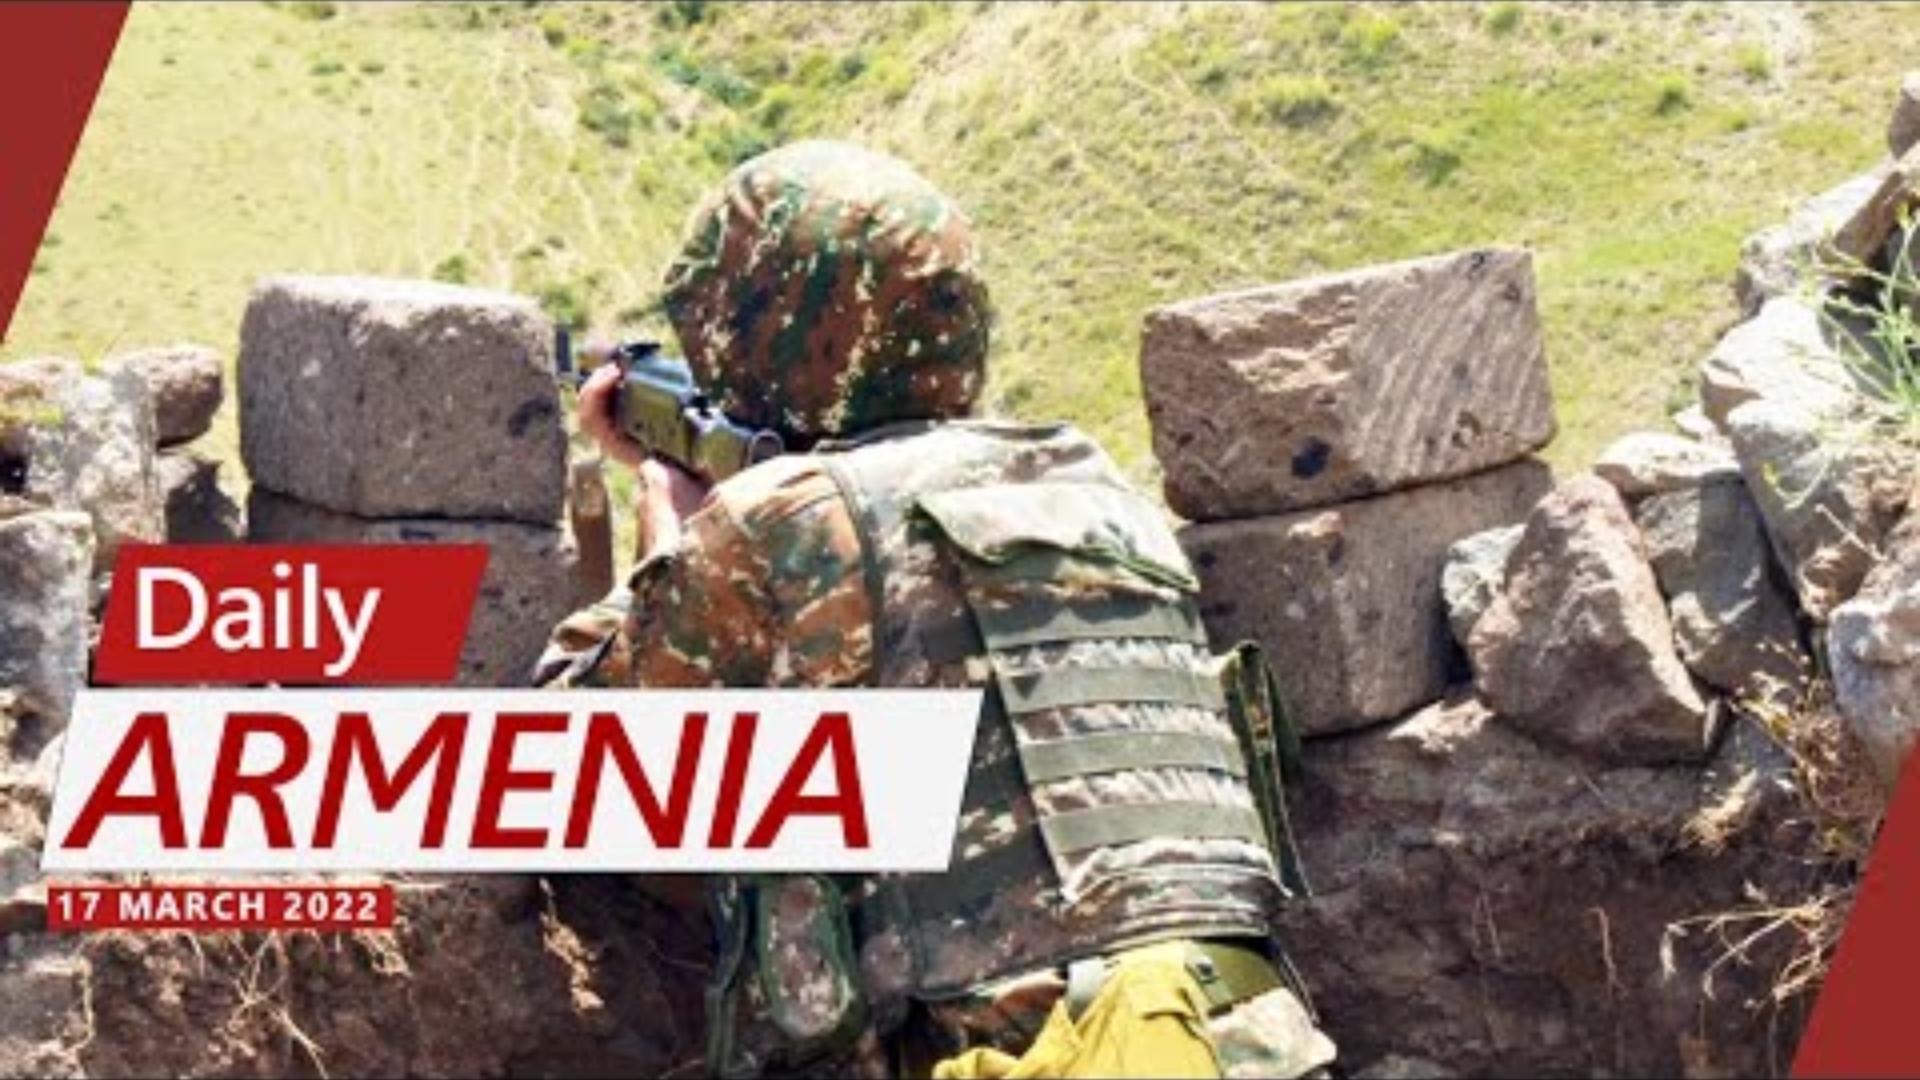 Two Armenian soldiers have been found dead at their posts in the past two days